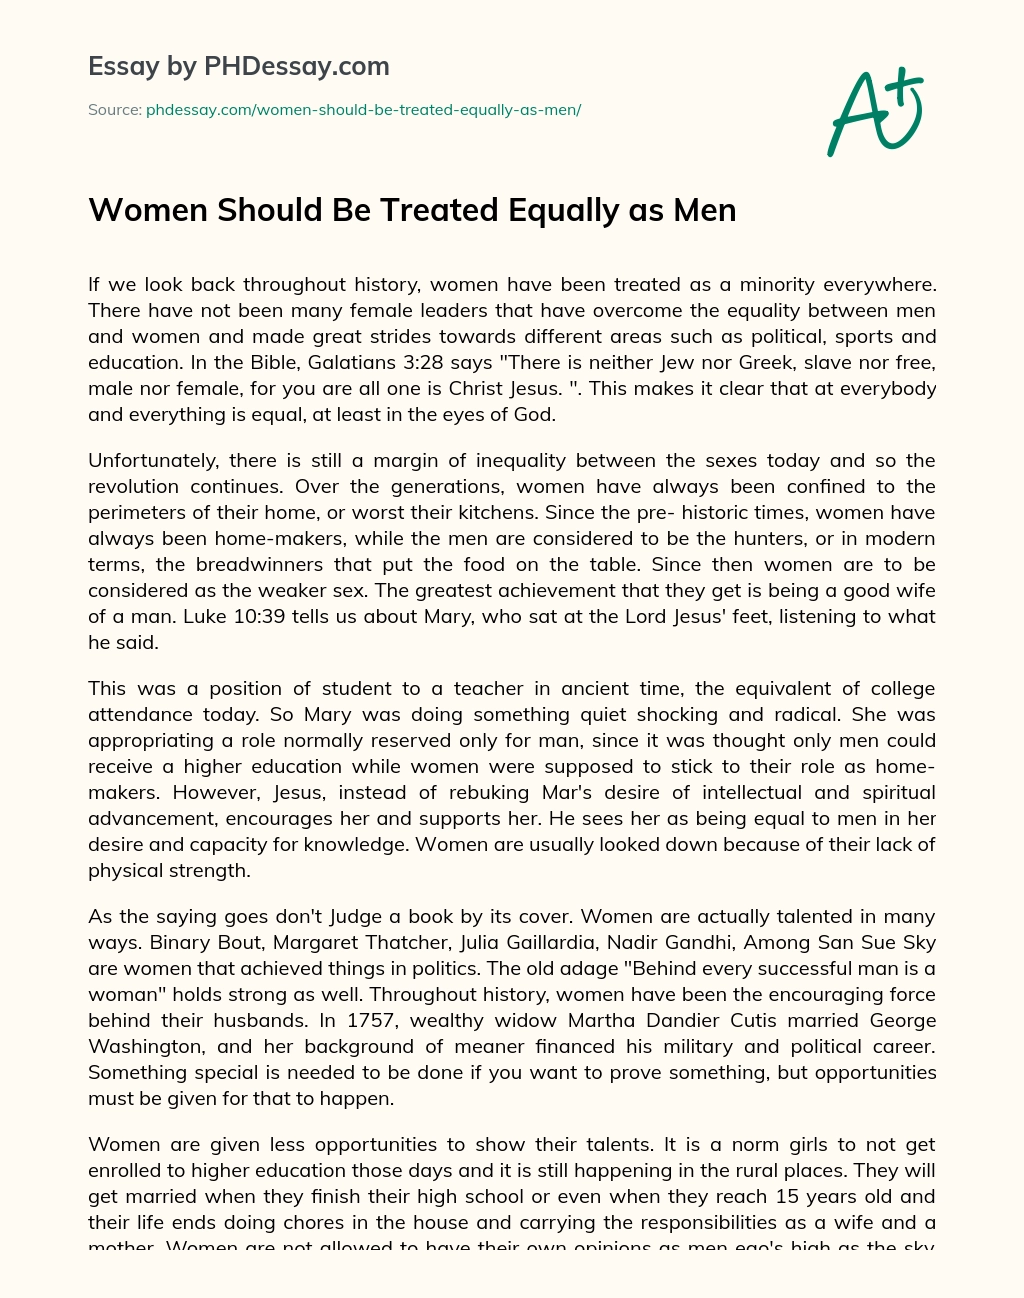 Women Should Be Treated Equally as Men essay